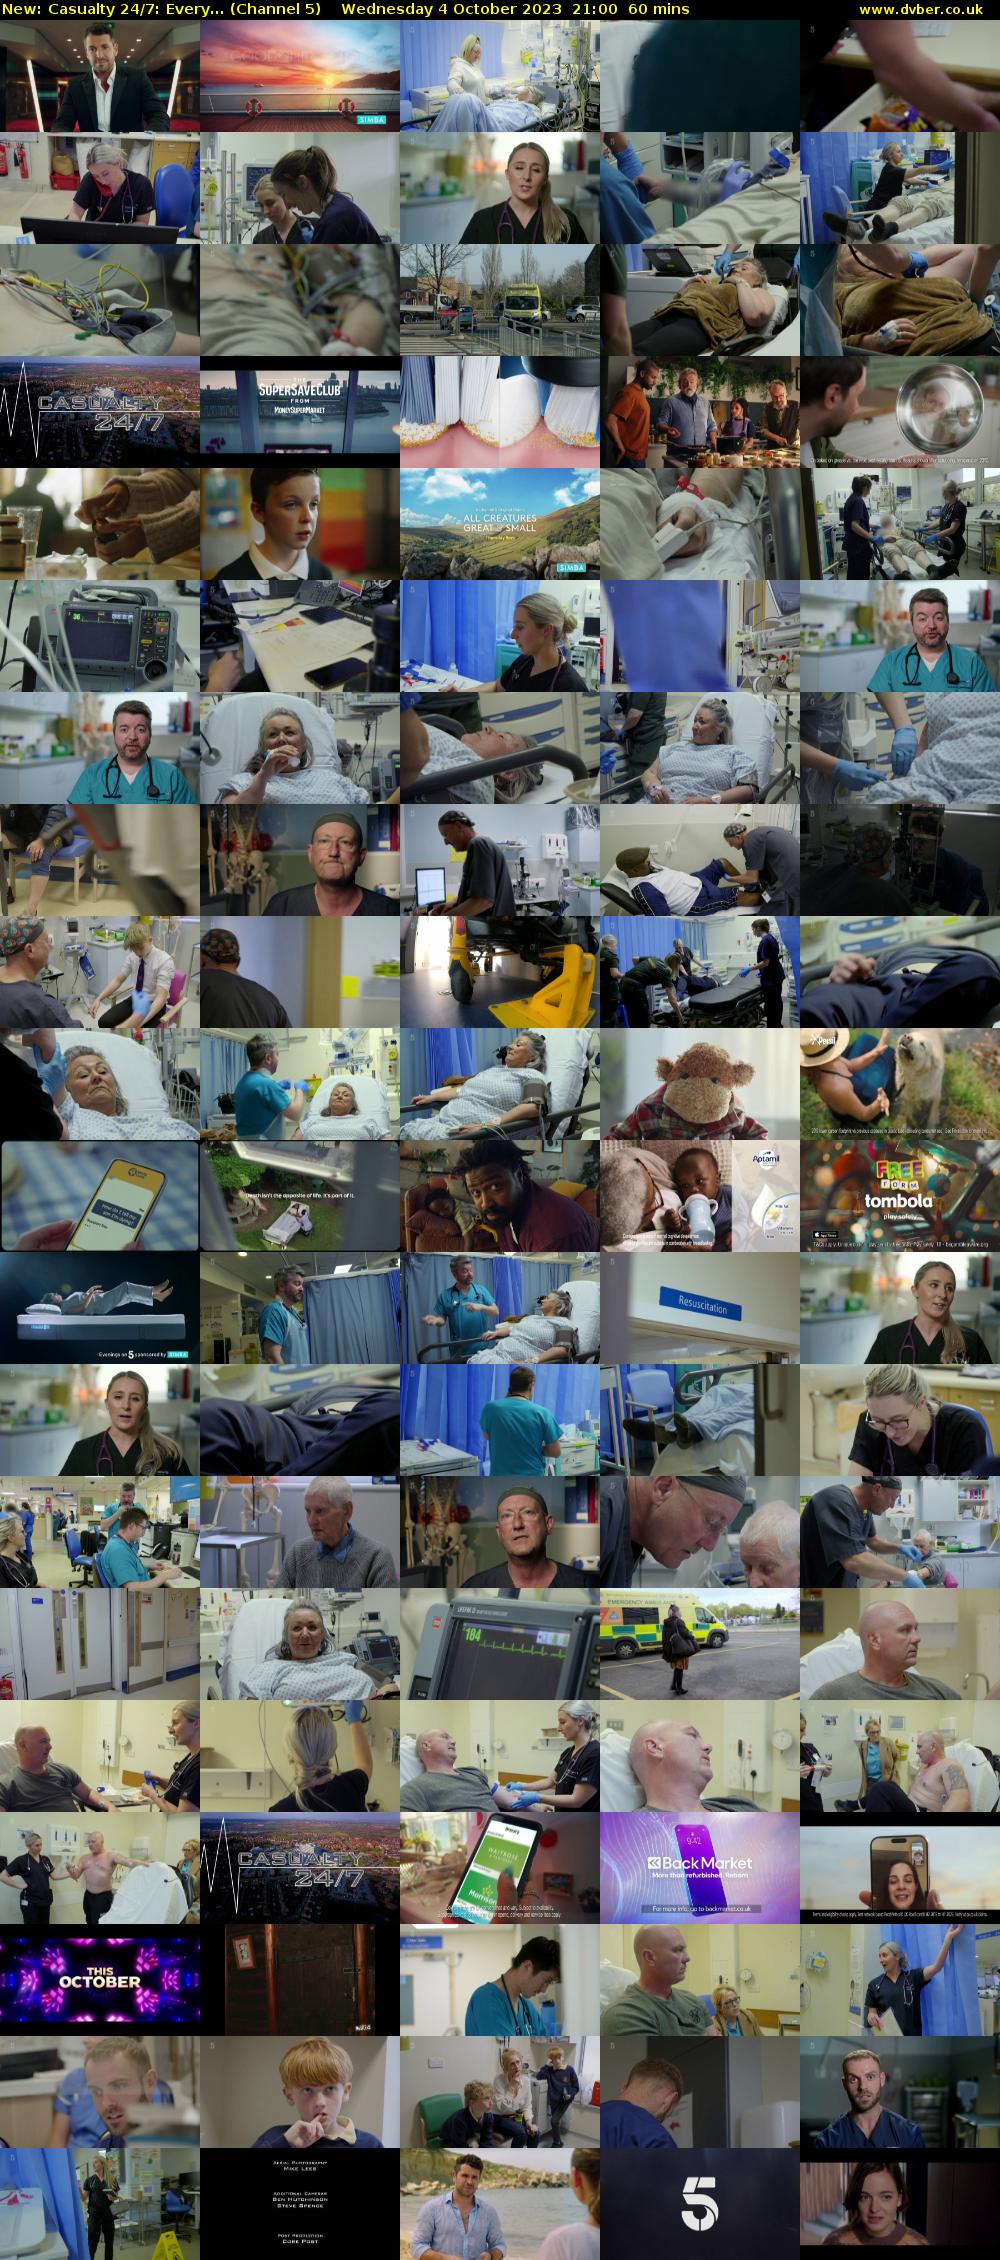 Casualty 24/7: Every... (Channel 5) Wednesday 4 October 2023 21:00 - 22:00